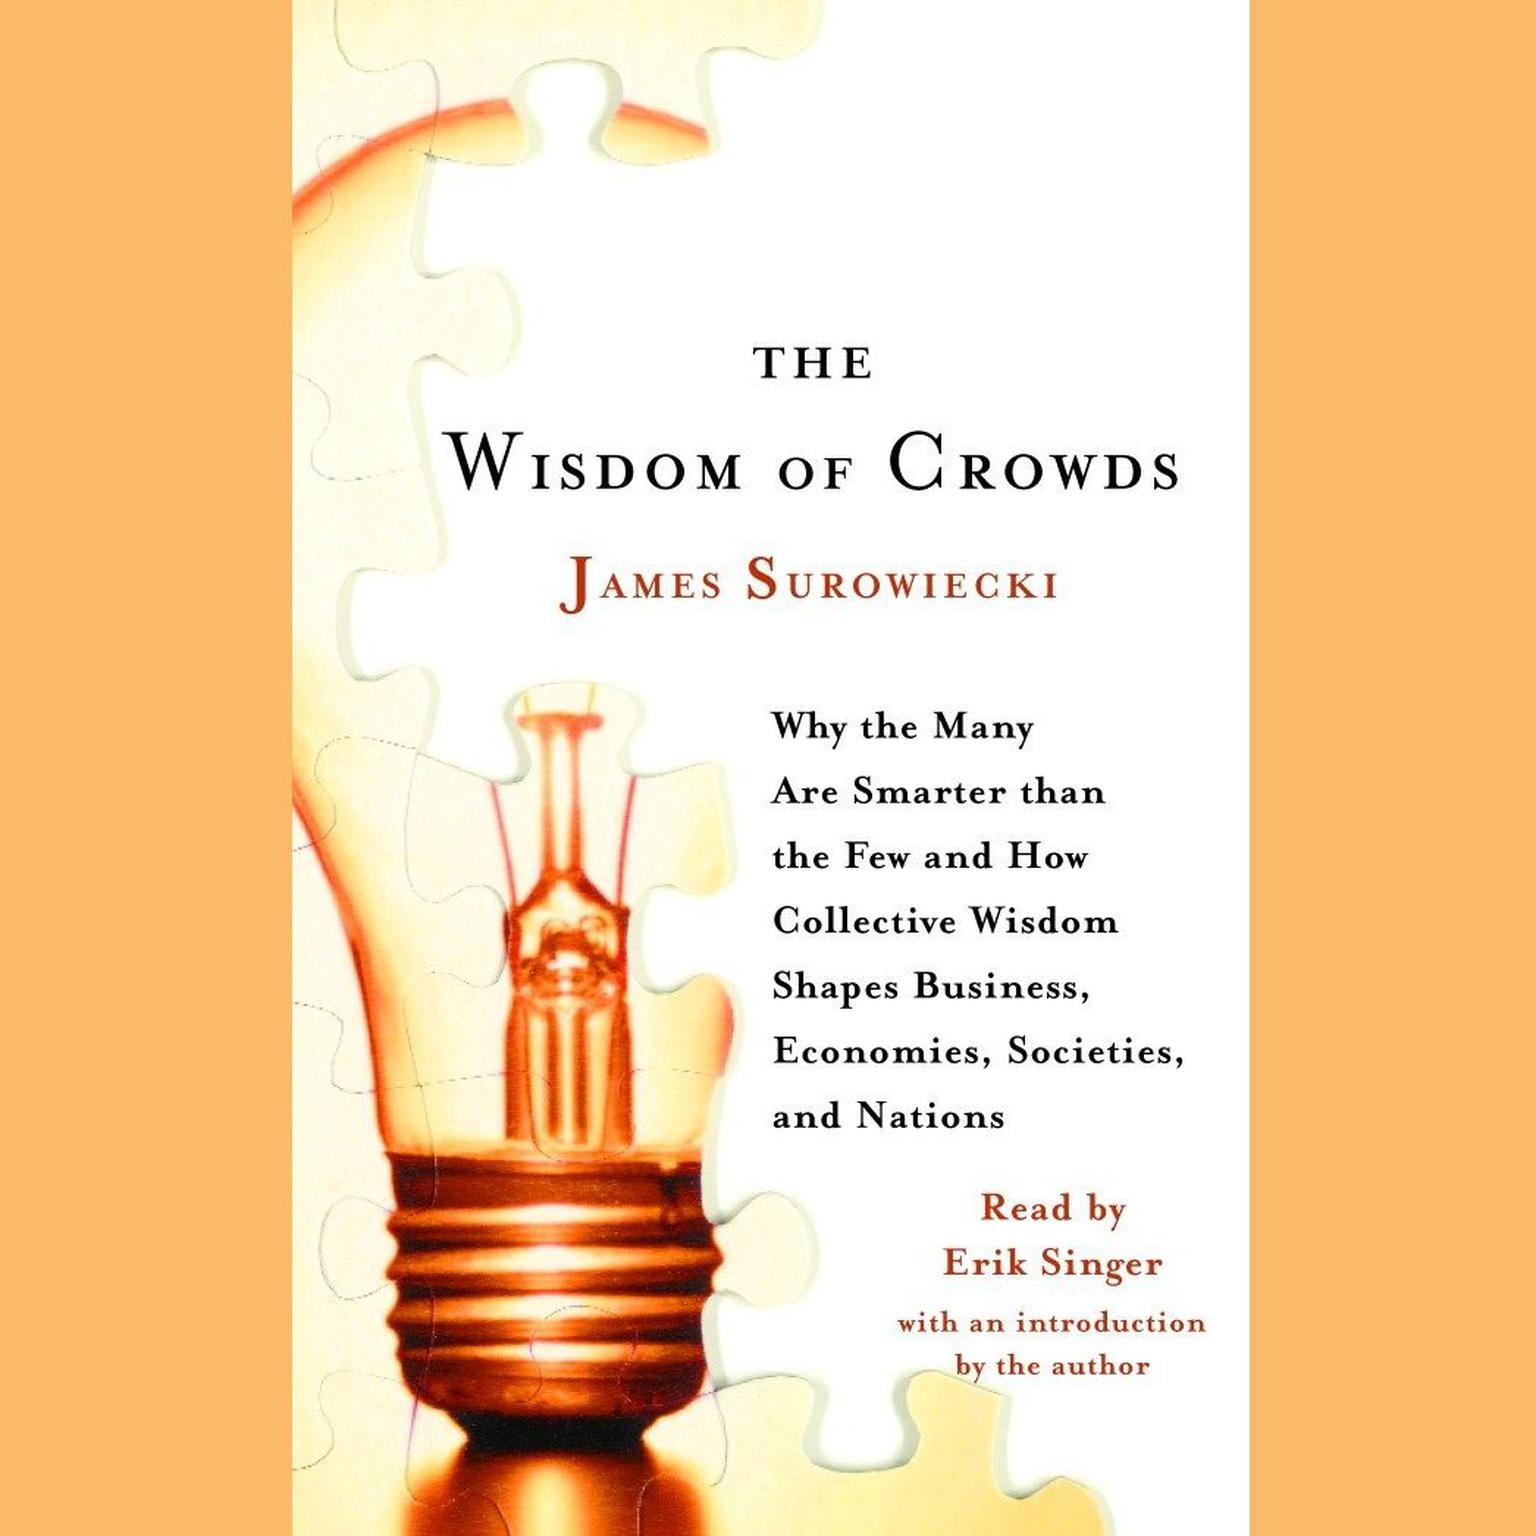 The Wisdom of Crowds (Abridged): Why the Many Are Smarter Than the Few and How Collective Wisdom Shapes Business, Economies, Societies and Nations Audiobook, by James Surowiecki